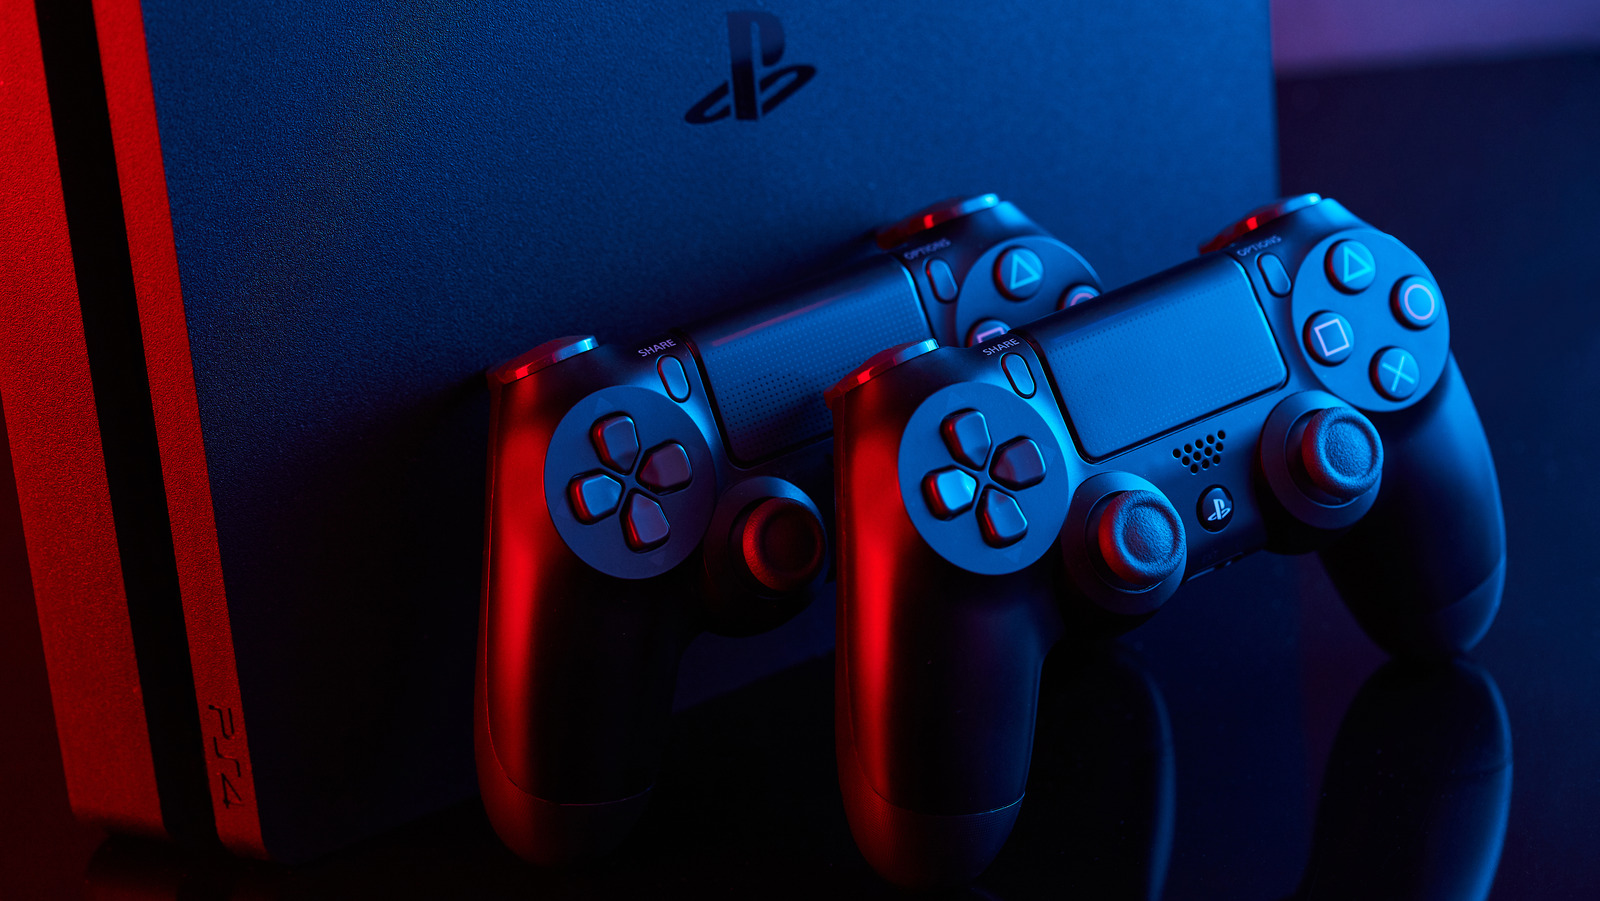 5 Ways to Fix PS4 That Won't Connect to Wi-Fi